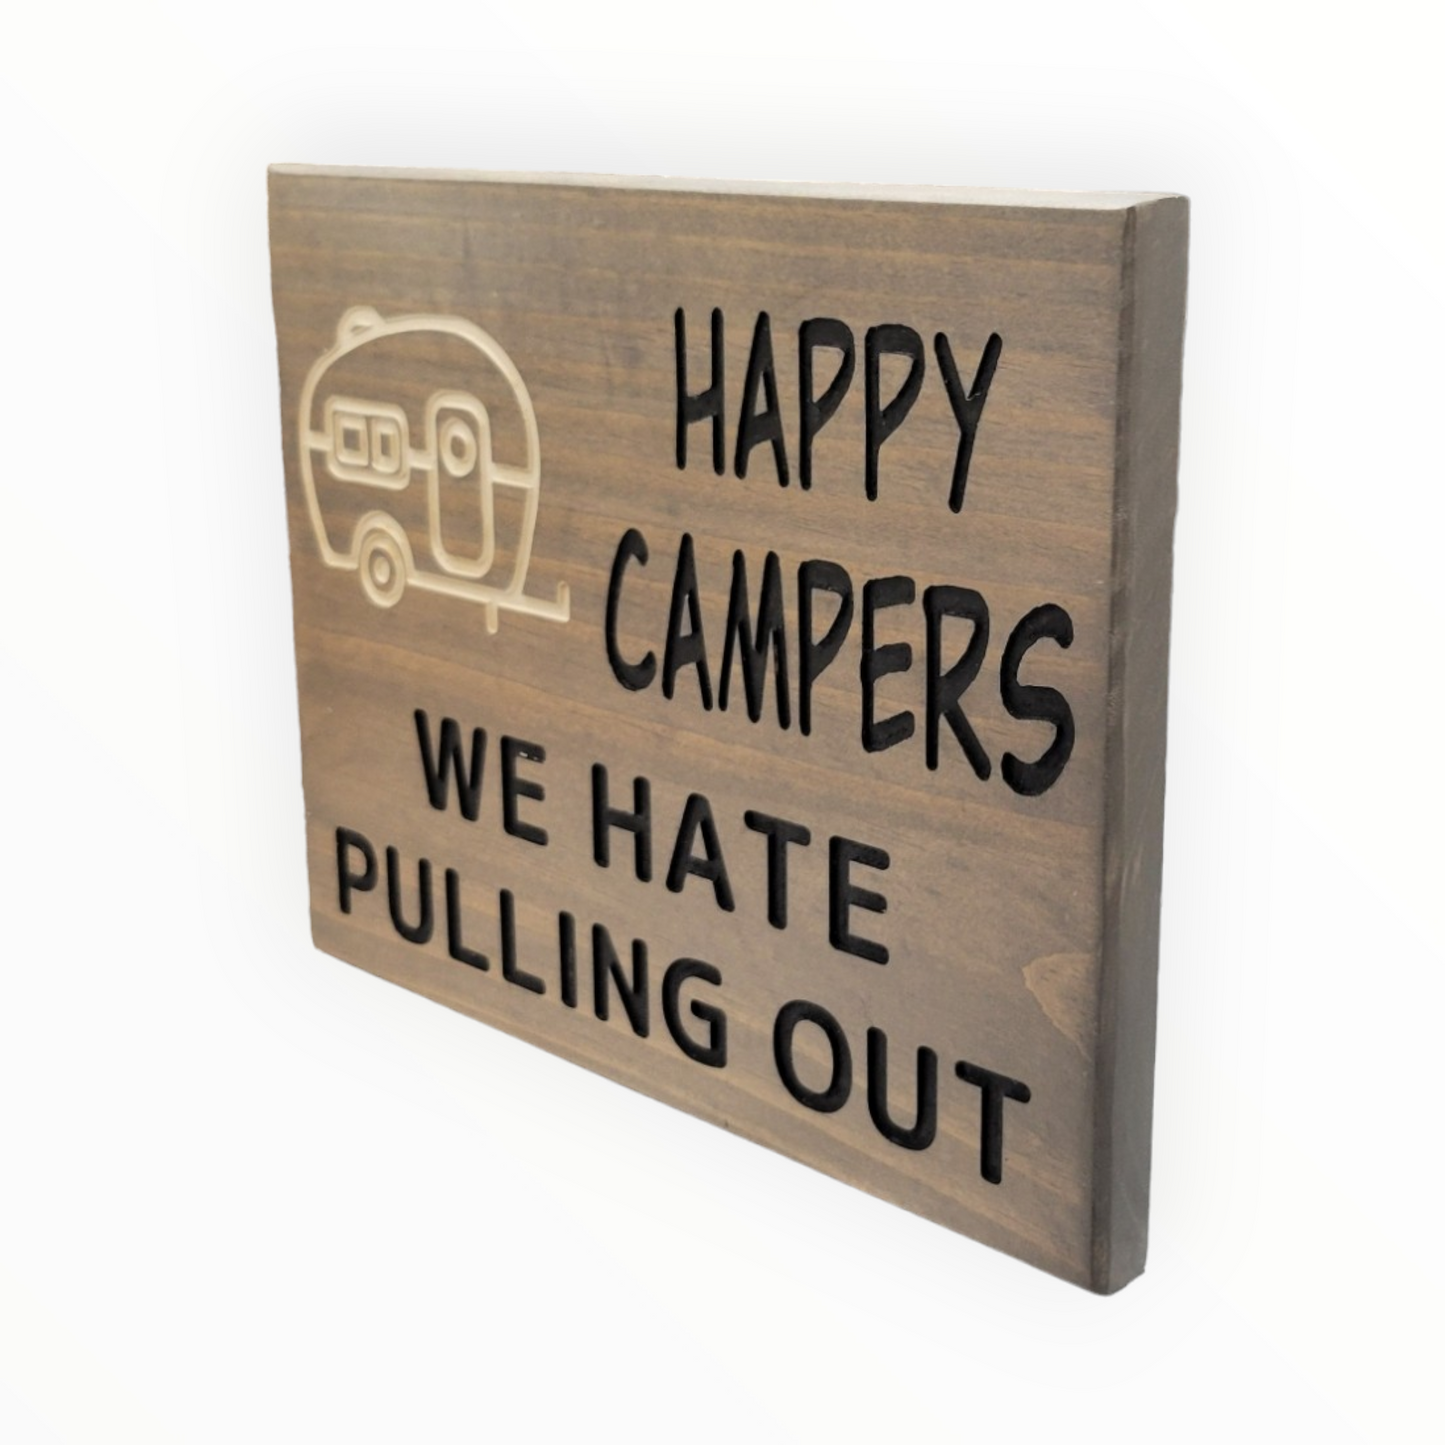 Happy Campers We Hate Pulling Out sign